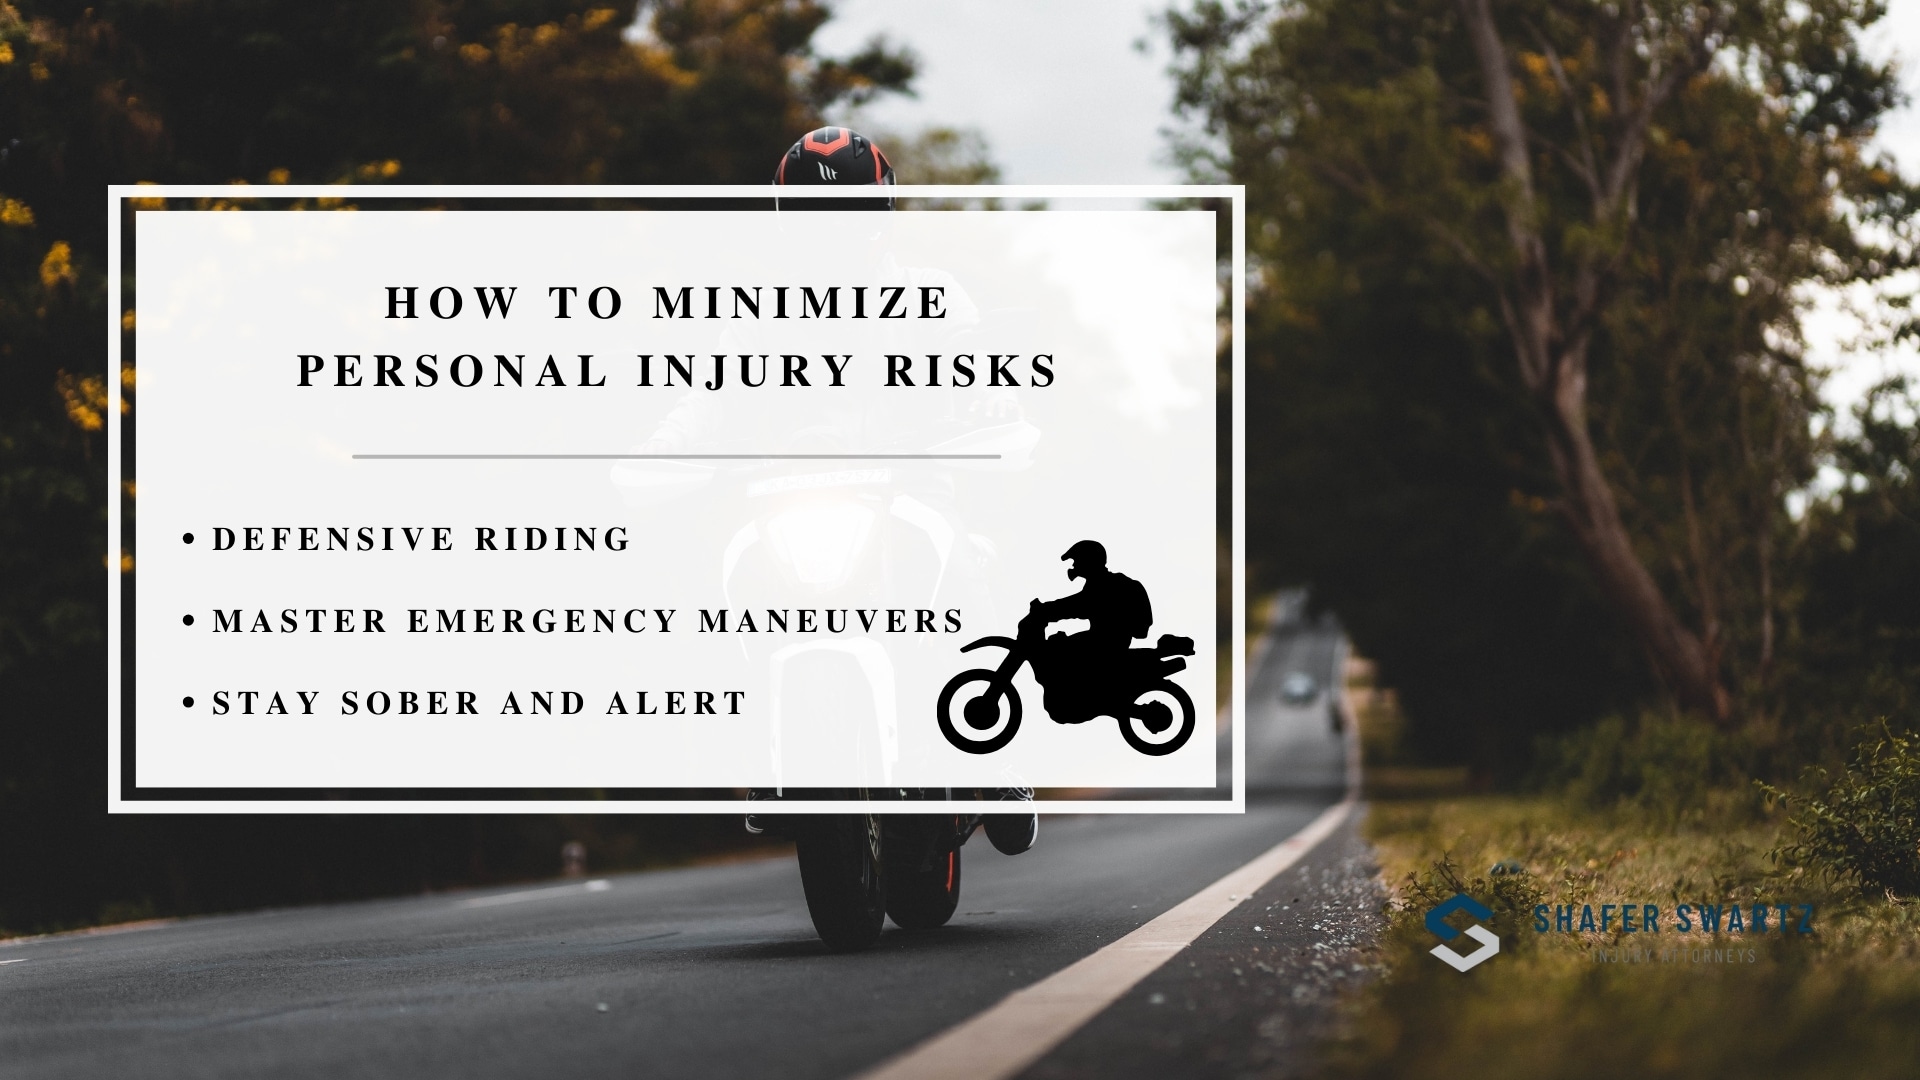 Infographic image of how to minimize personal injury risks